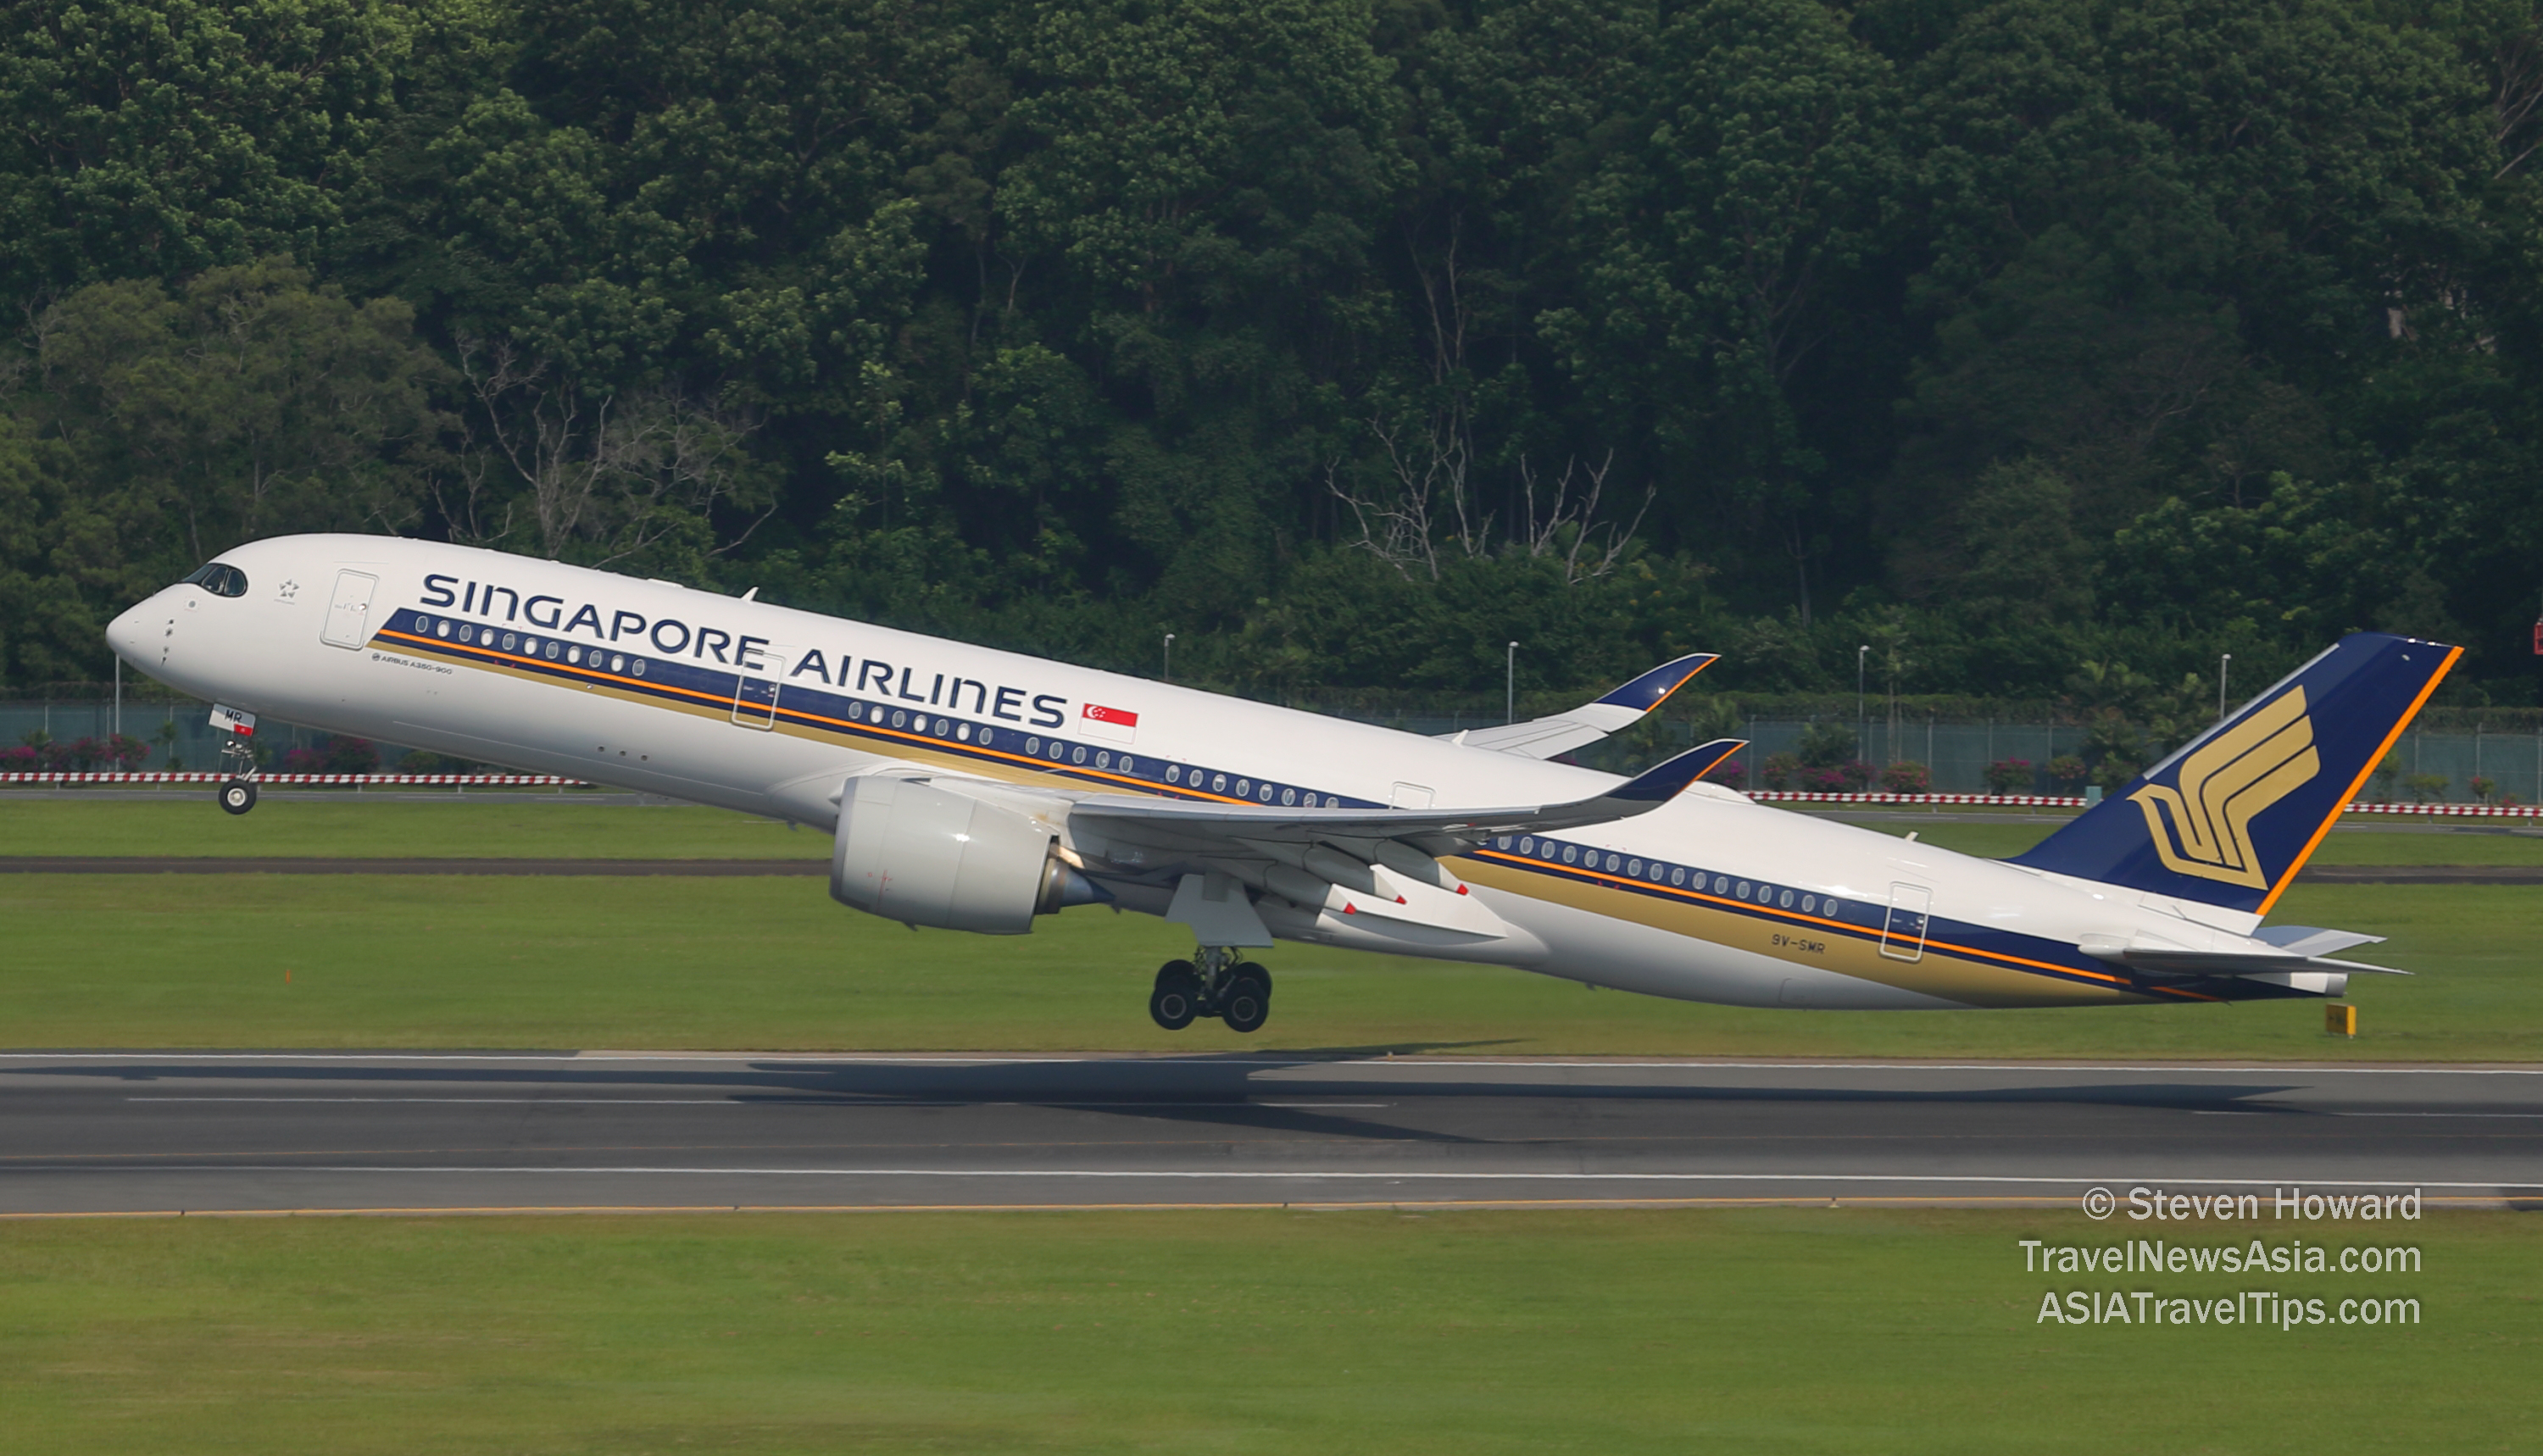 Singapore Airlines Boeing 777-300ER reg: 9V-SWR. Picture by Steven Howard of TravelNewsAsia.com Click to enlarge.